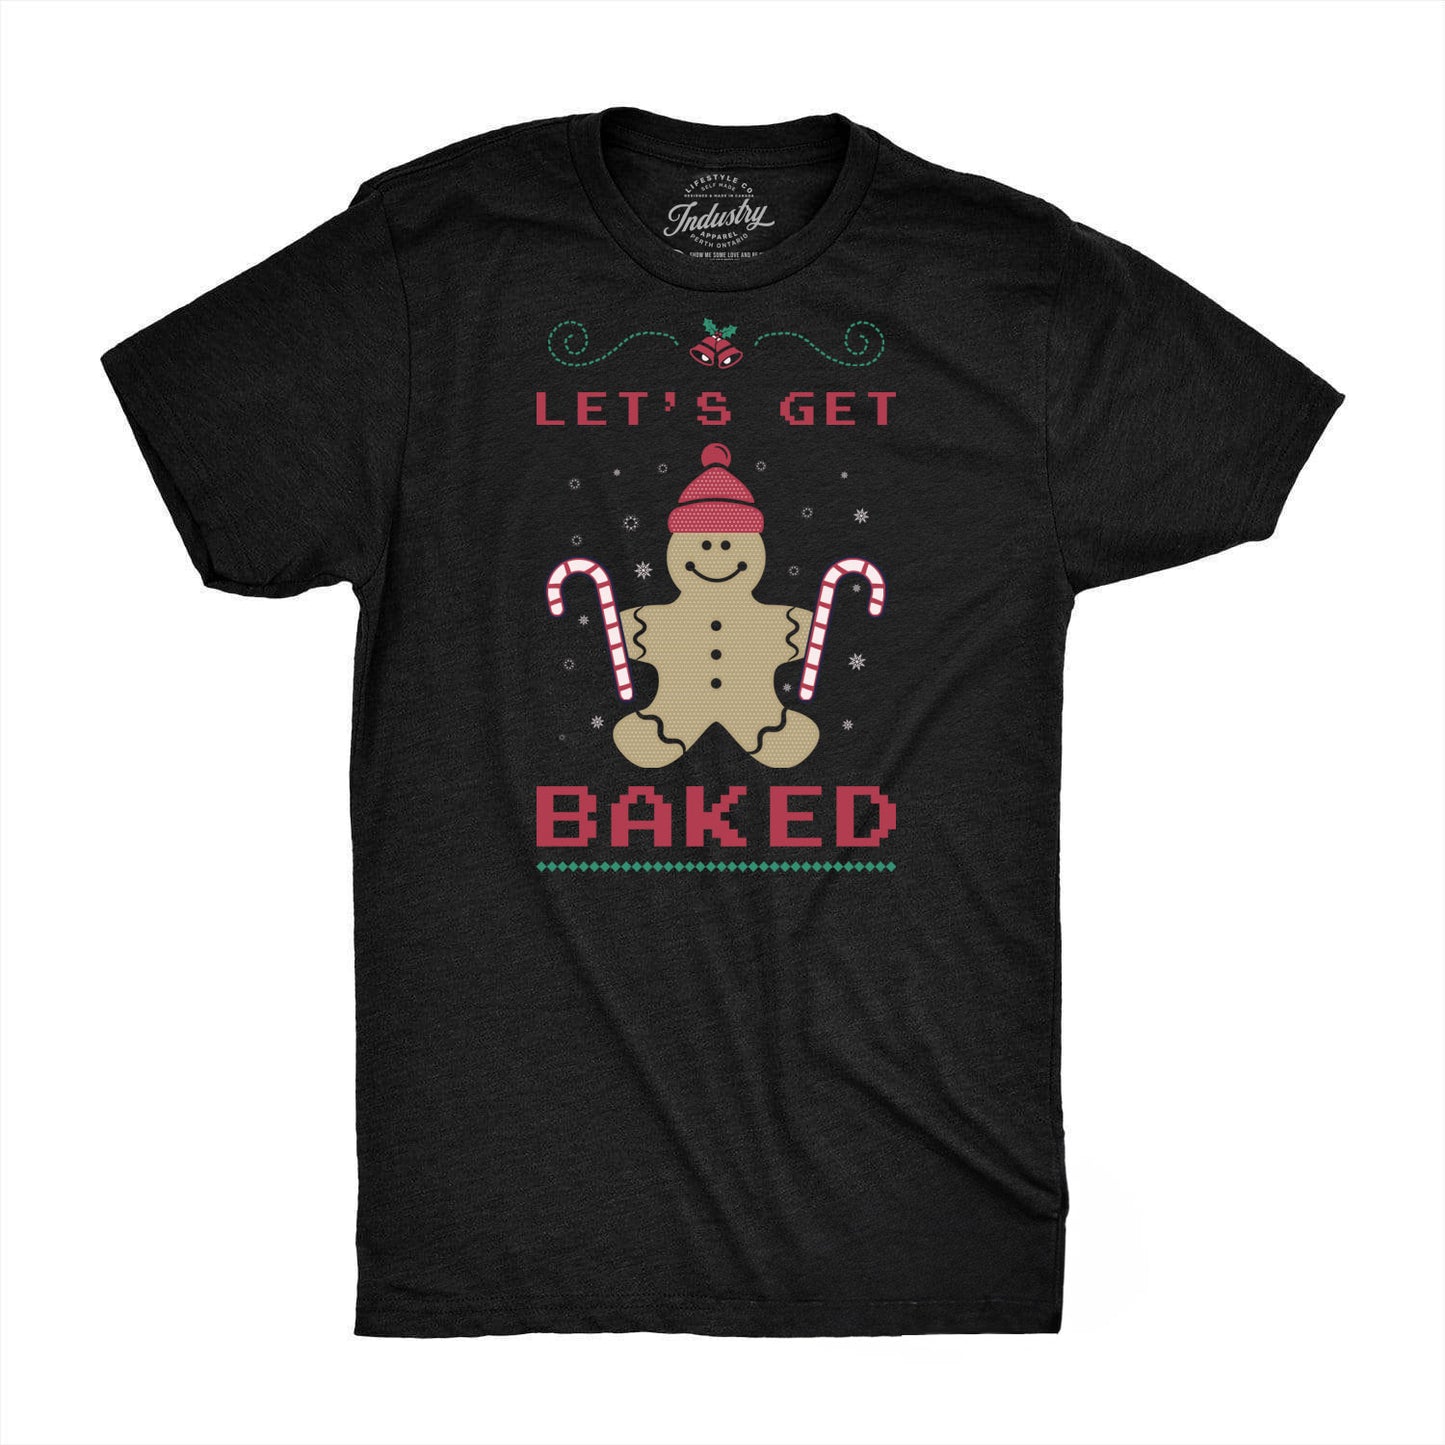 Holiday Tee - "Lets Get Baked"